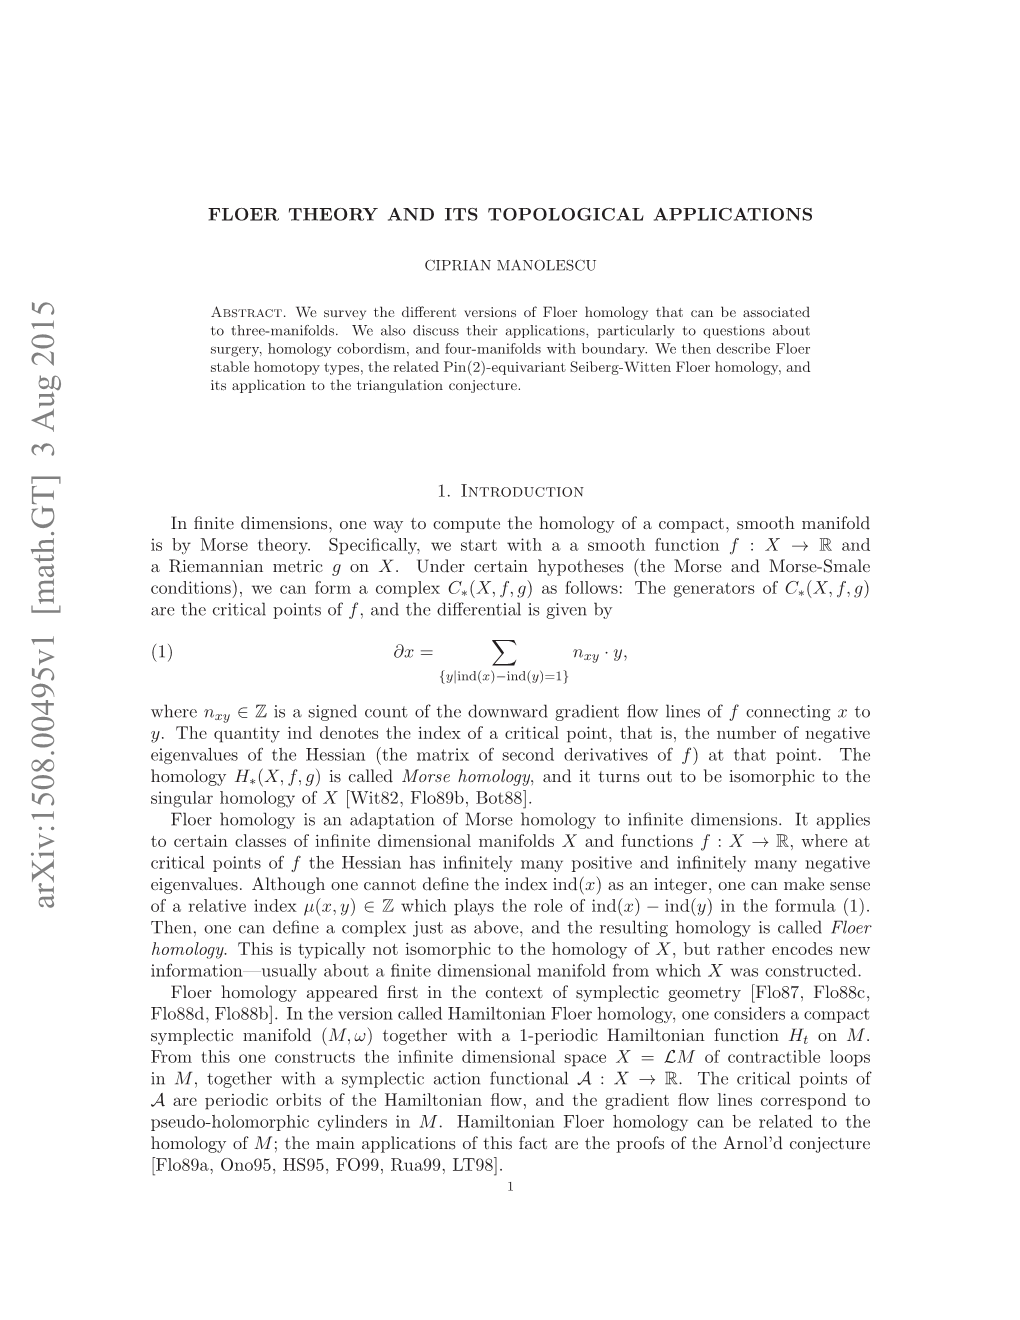 Floer Theory and Its Topological Applications